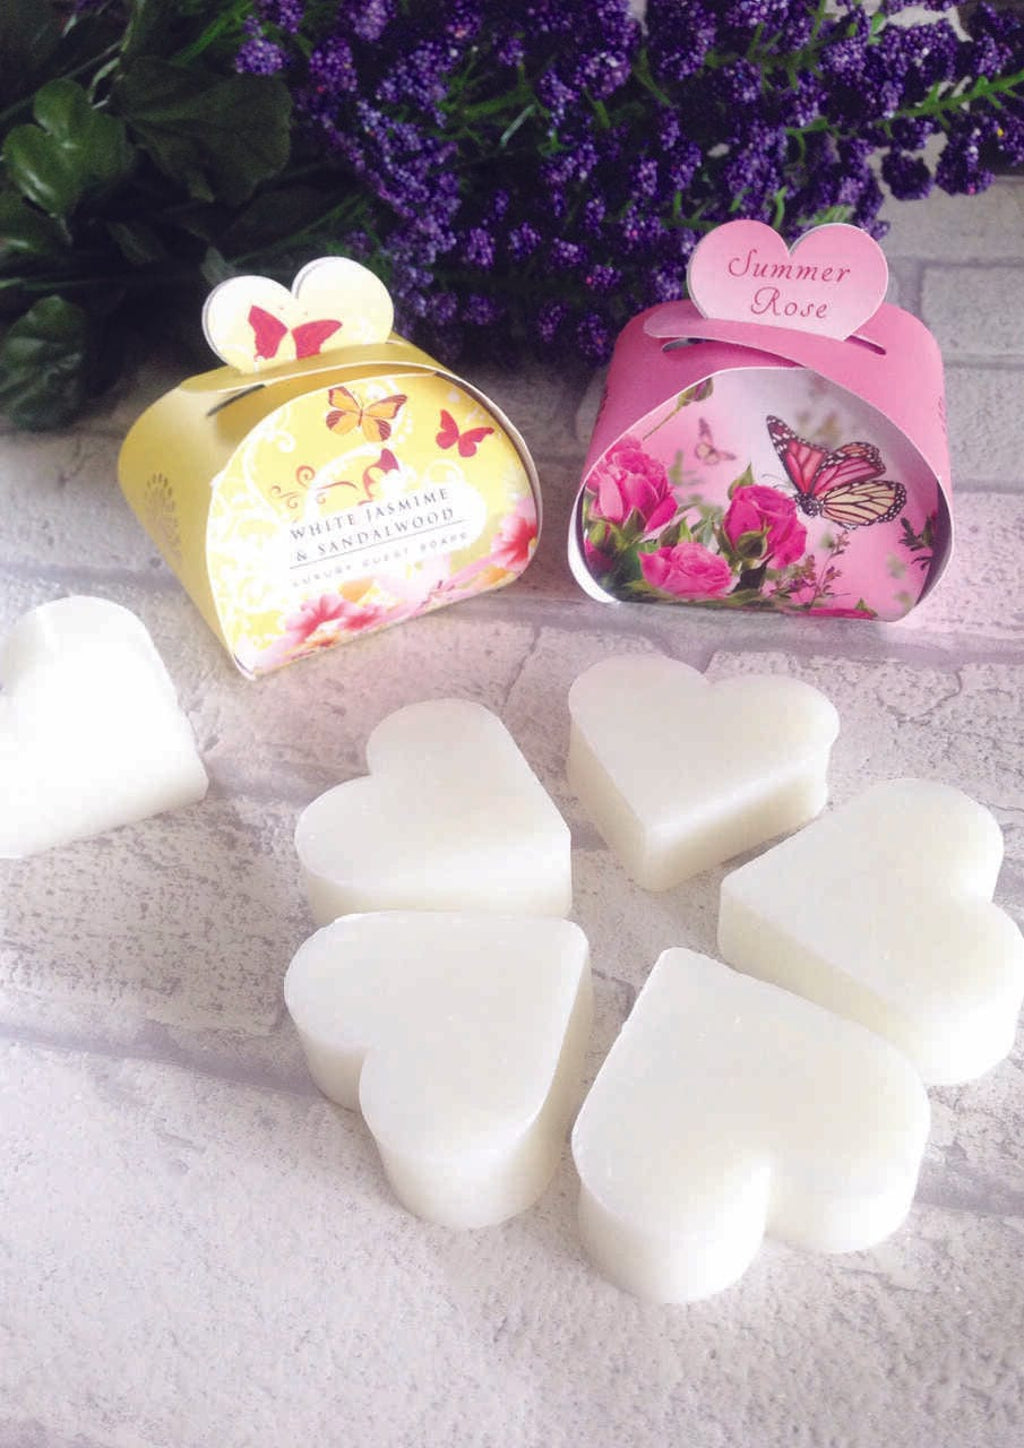 Oriental Spice and Cherry Blossom Guest Soaps (3 x 20g) from our Luxury Bar Soap collection by The English Soap Company